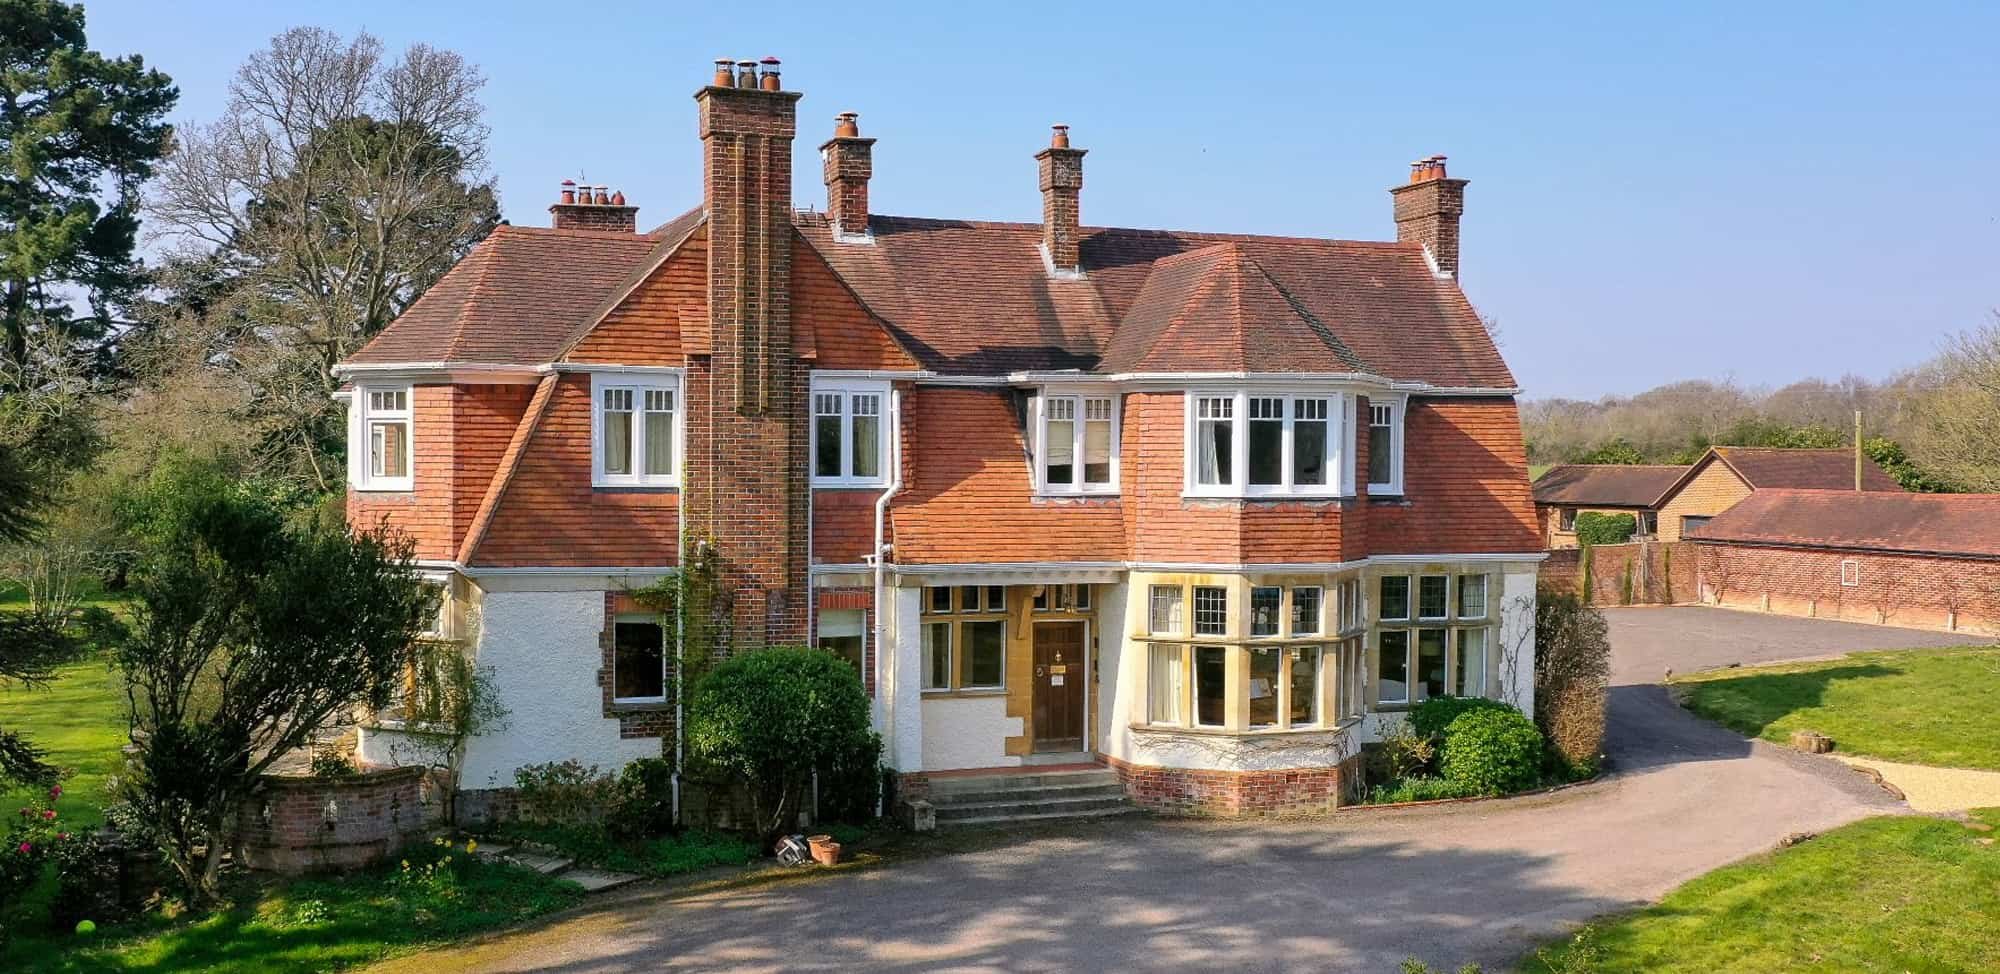 Large red brick house with lots of chimneys - Arnewood Manor, New Forest